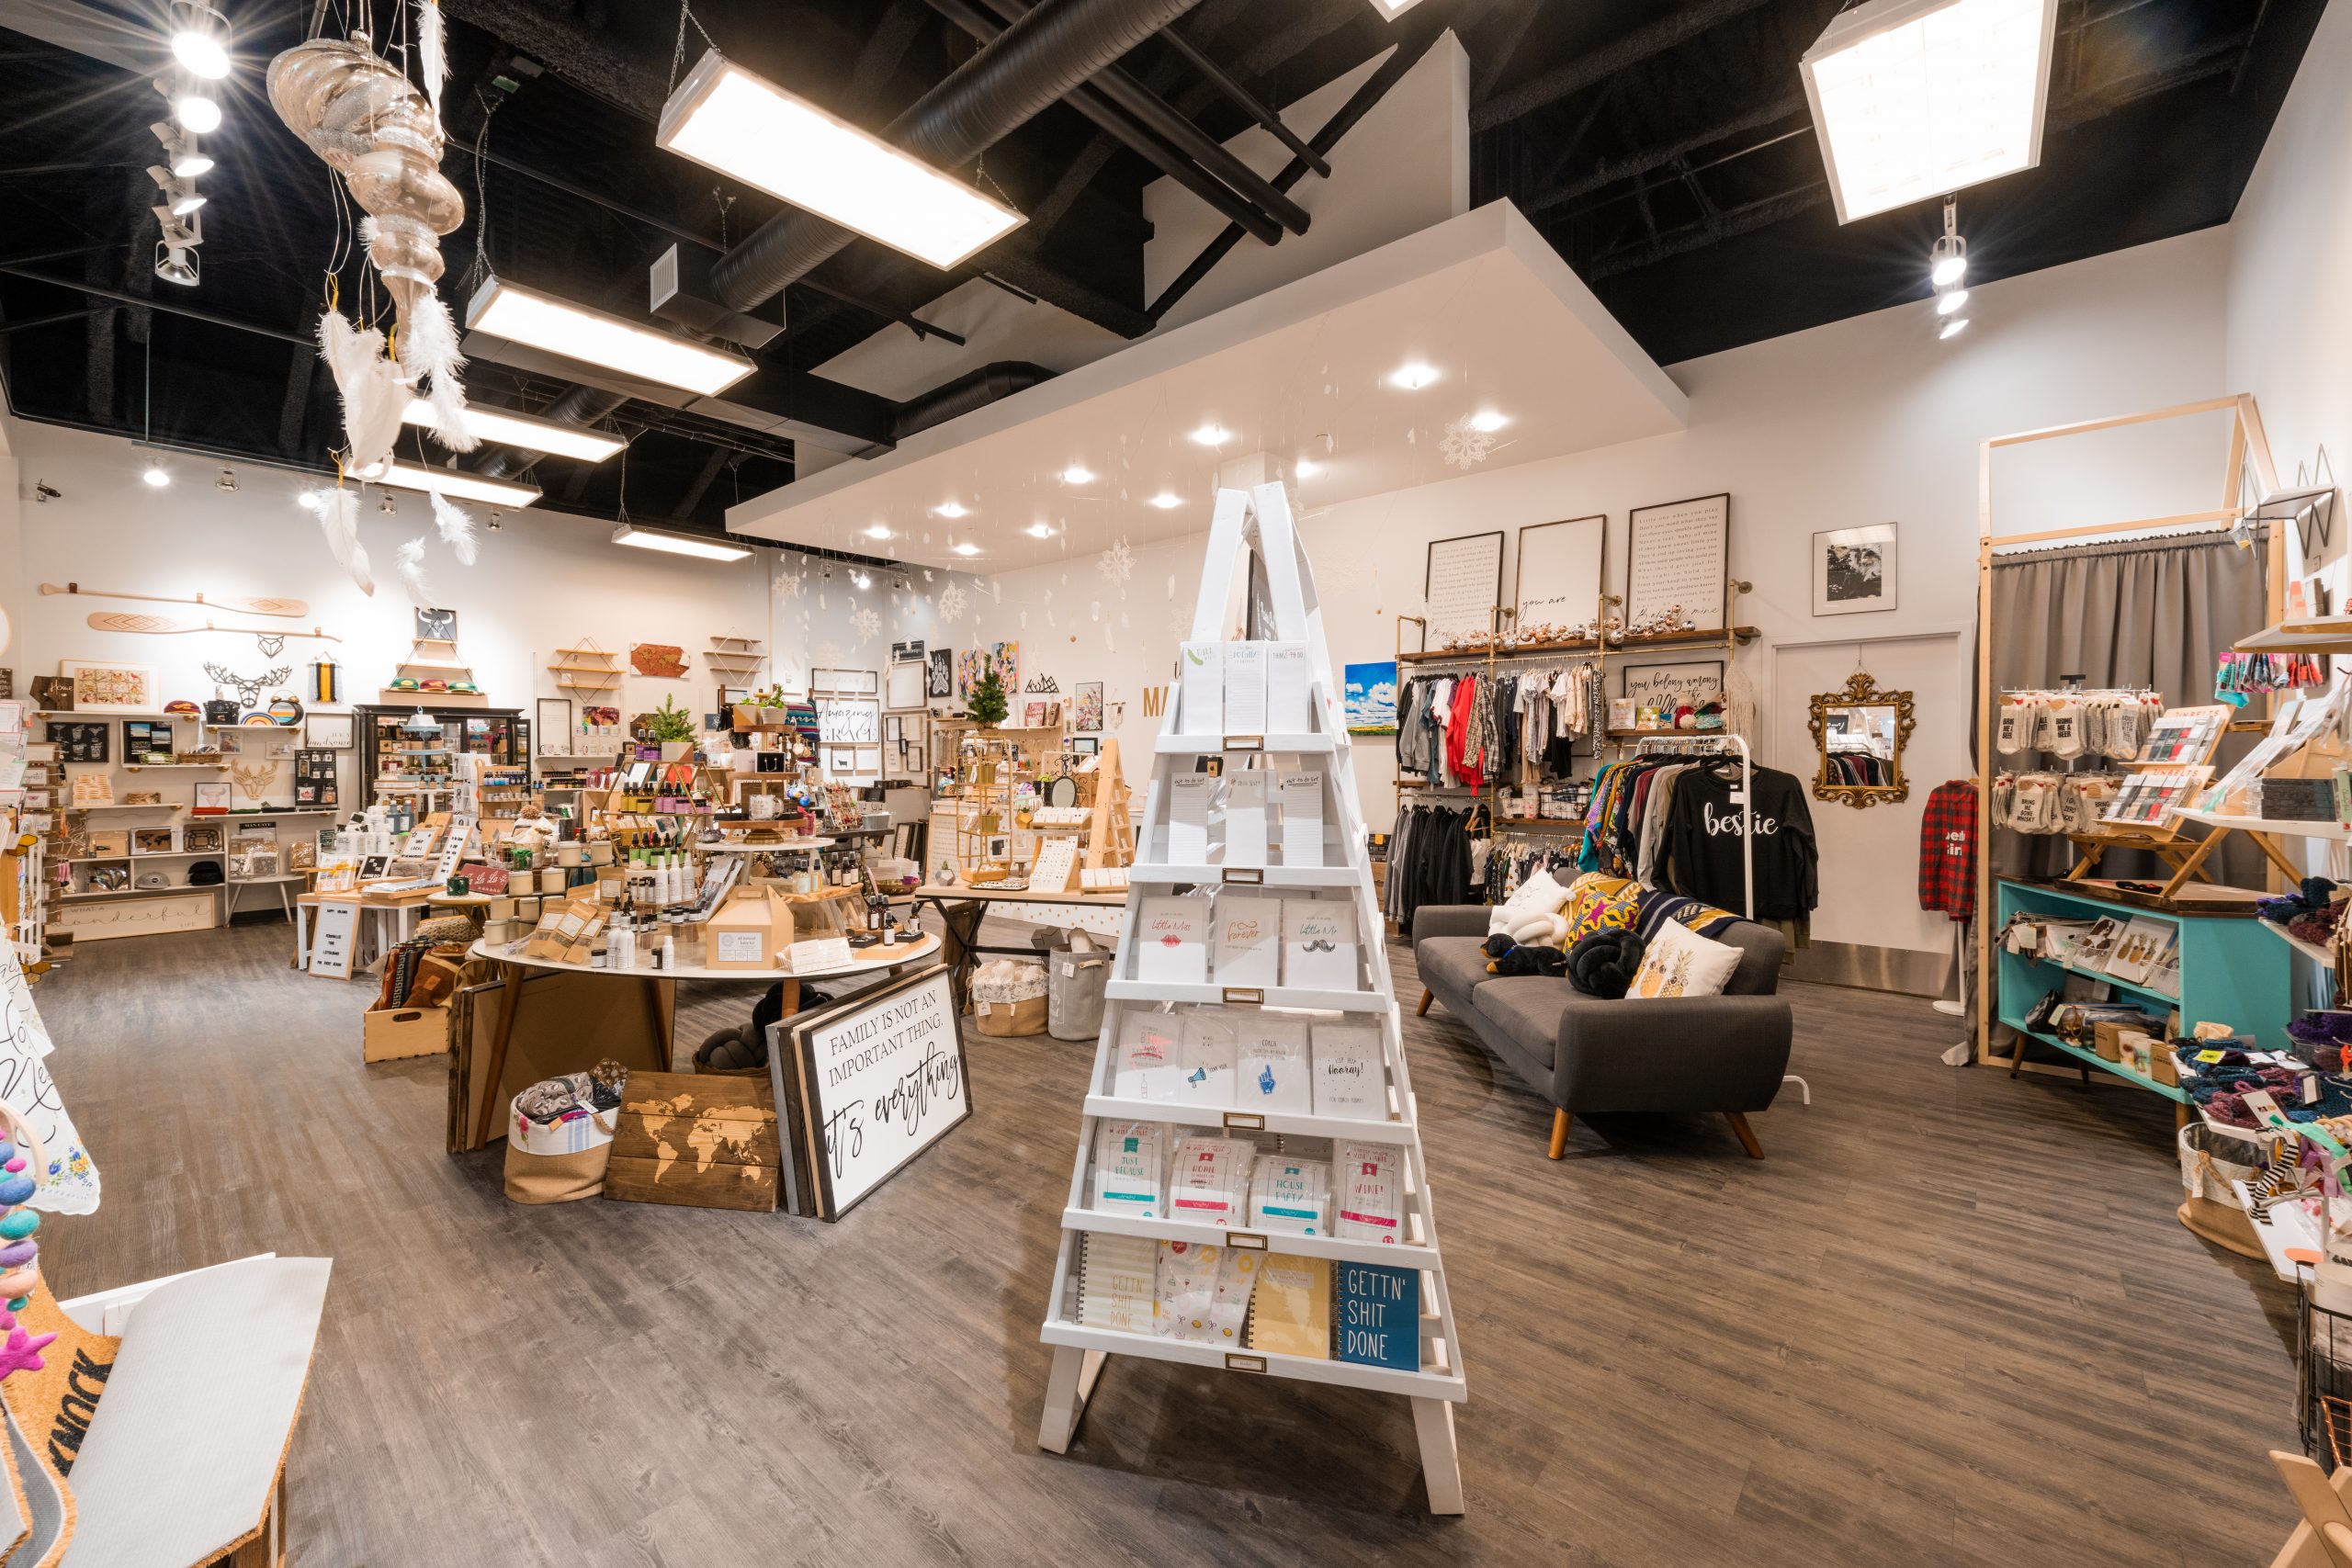 Inside of a store with cards, apparel, art